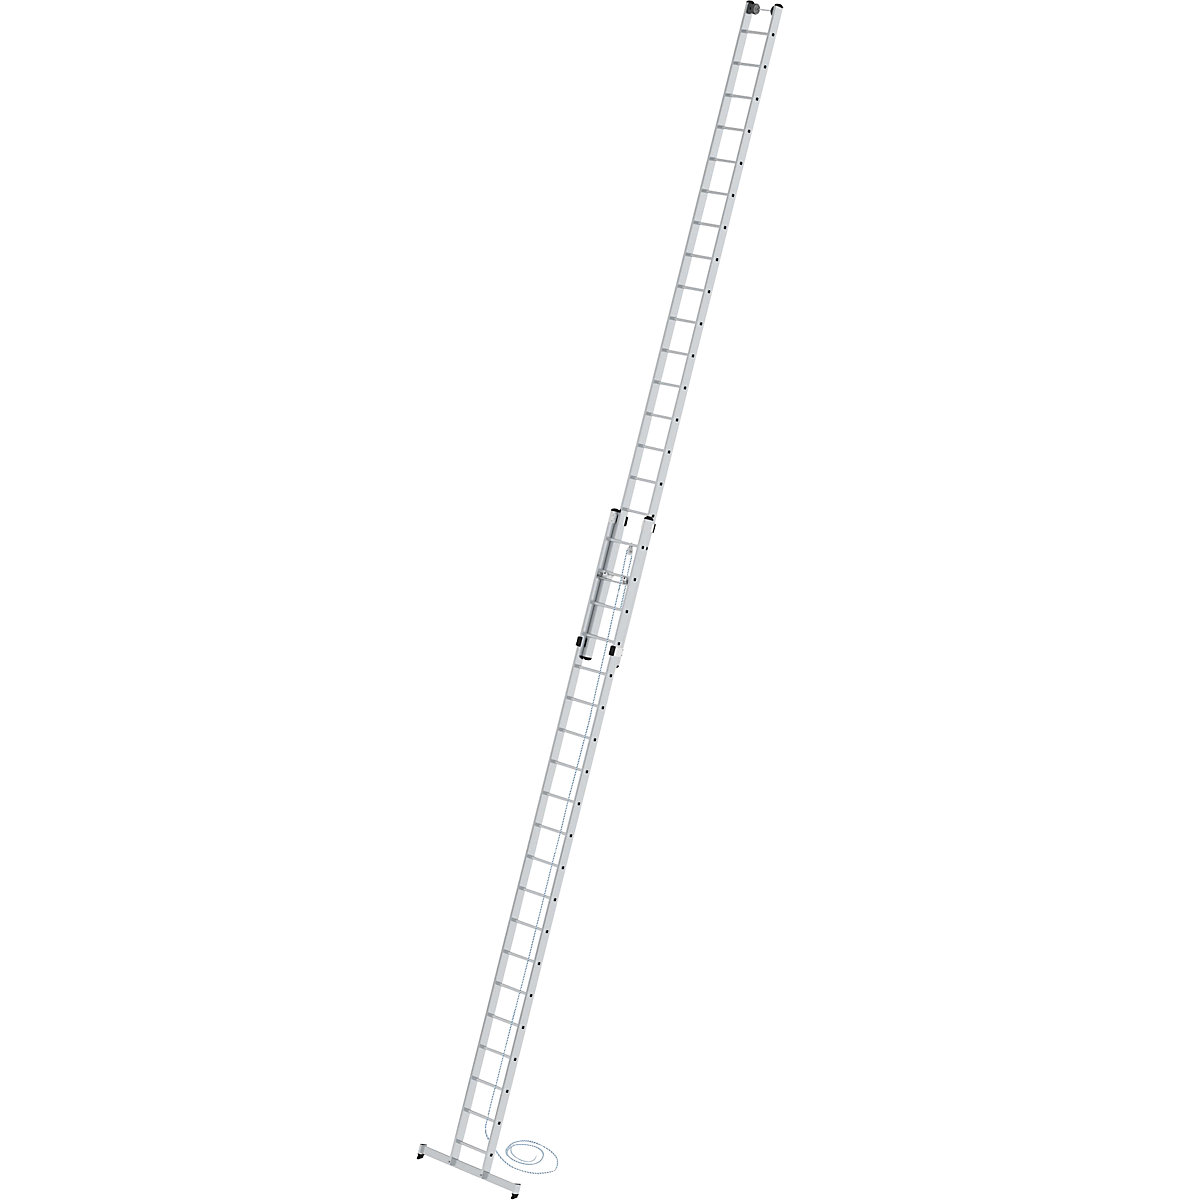 Height adjustable lean-to ladder – MUNK, rope operated extension ladder, 2-part with nivello® support, 2 x 20 rungs-5